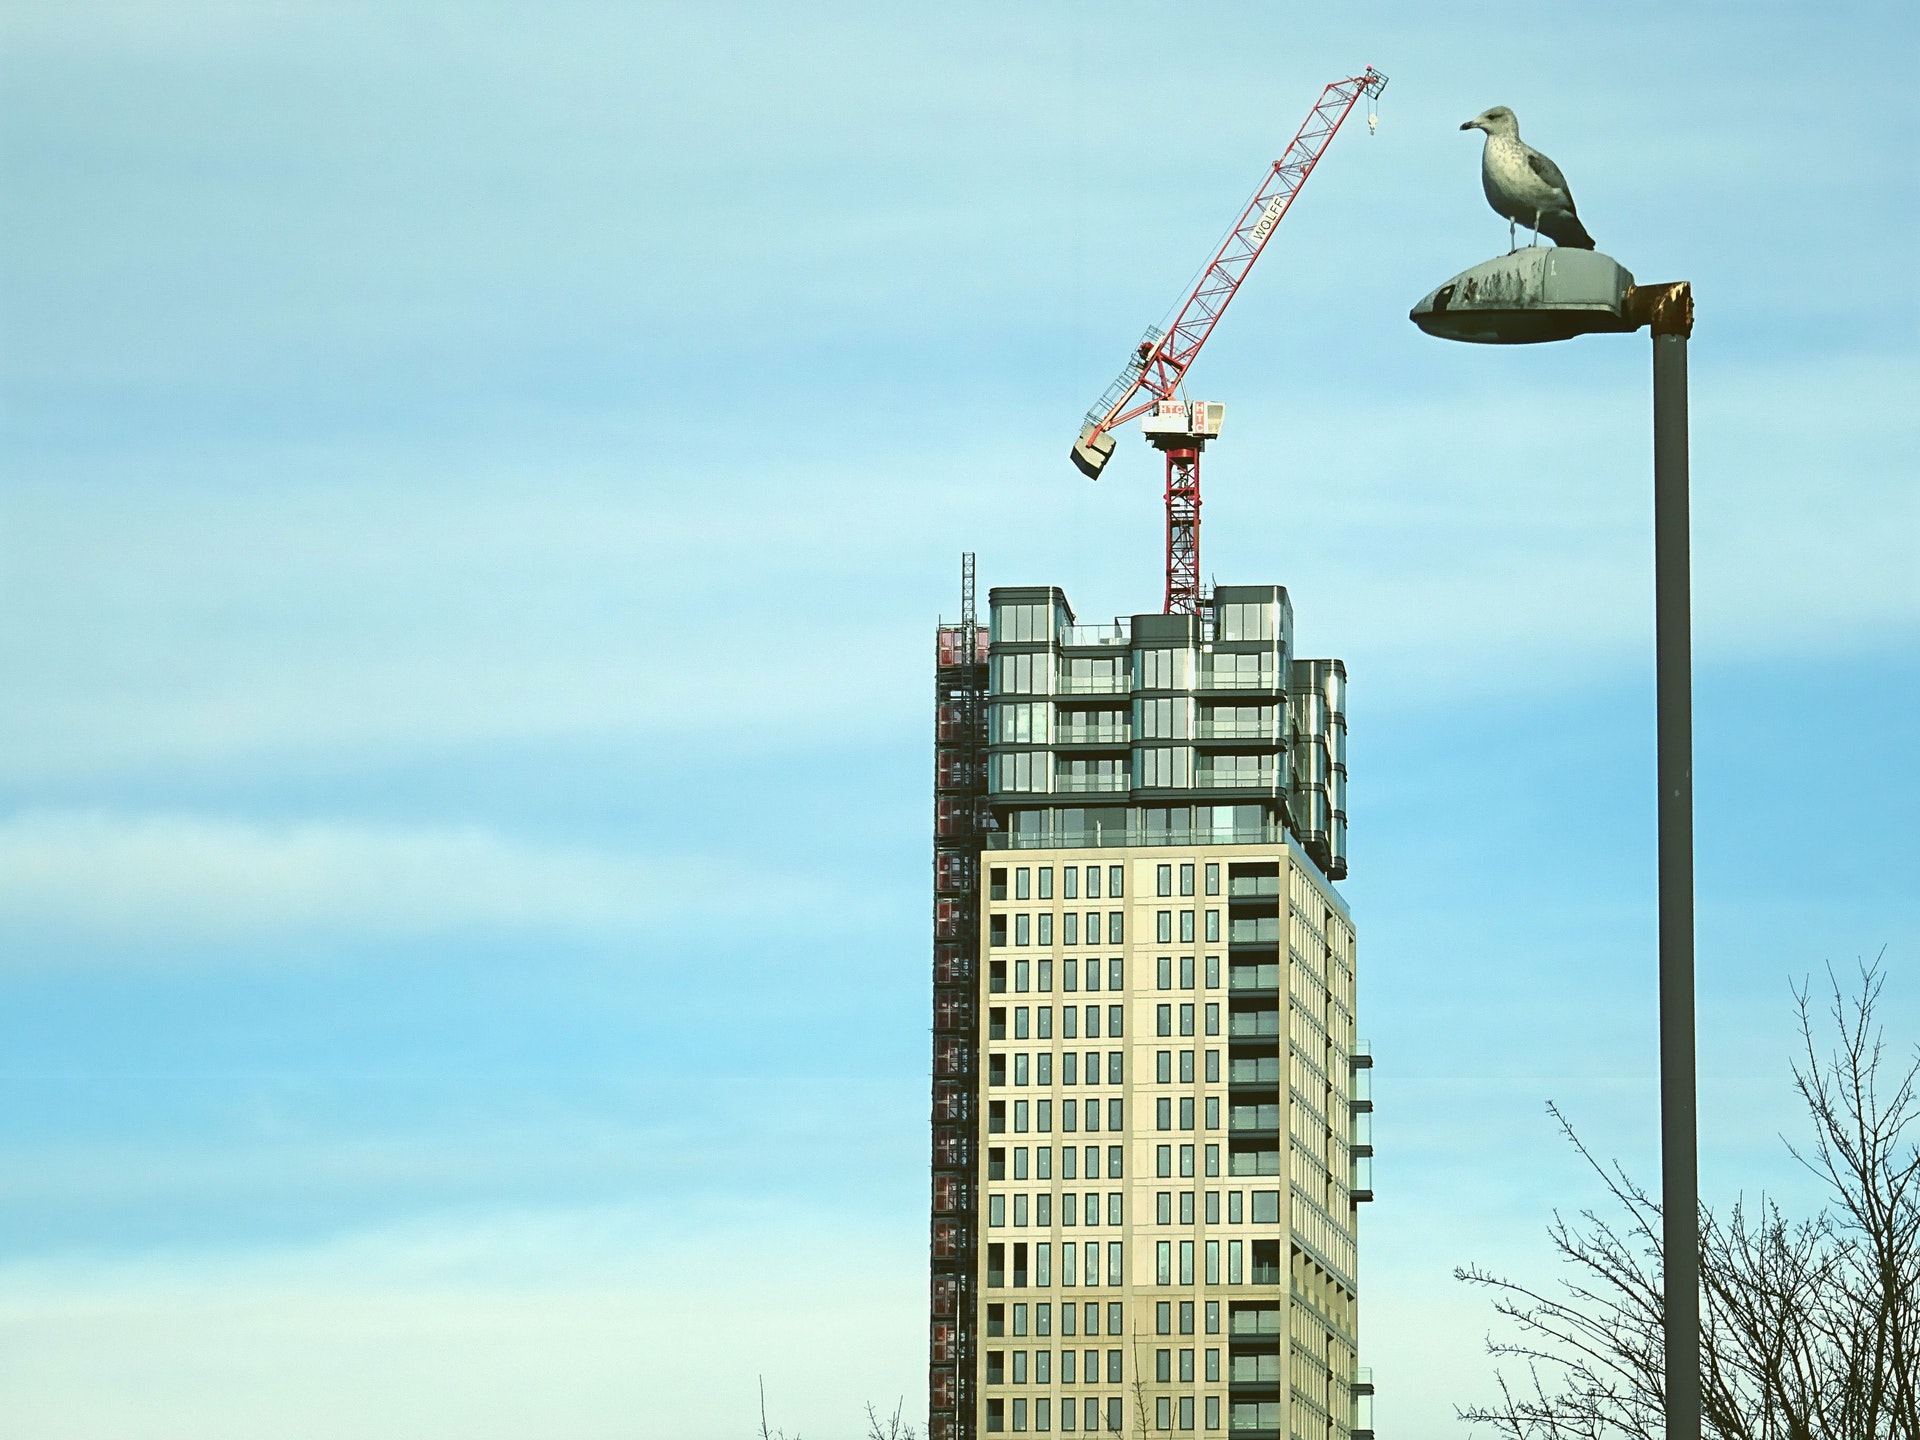 How to stop birds at a construction site